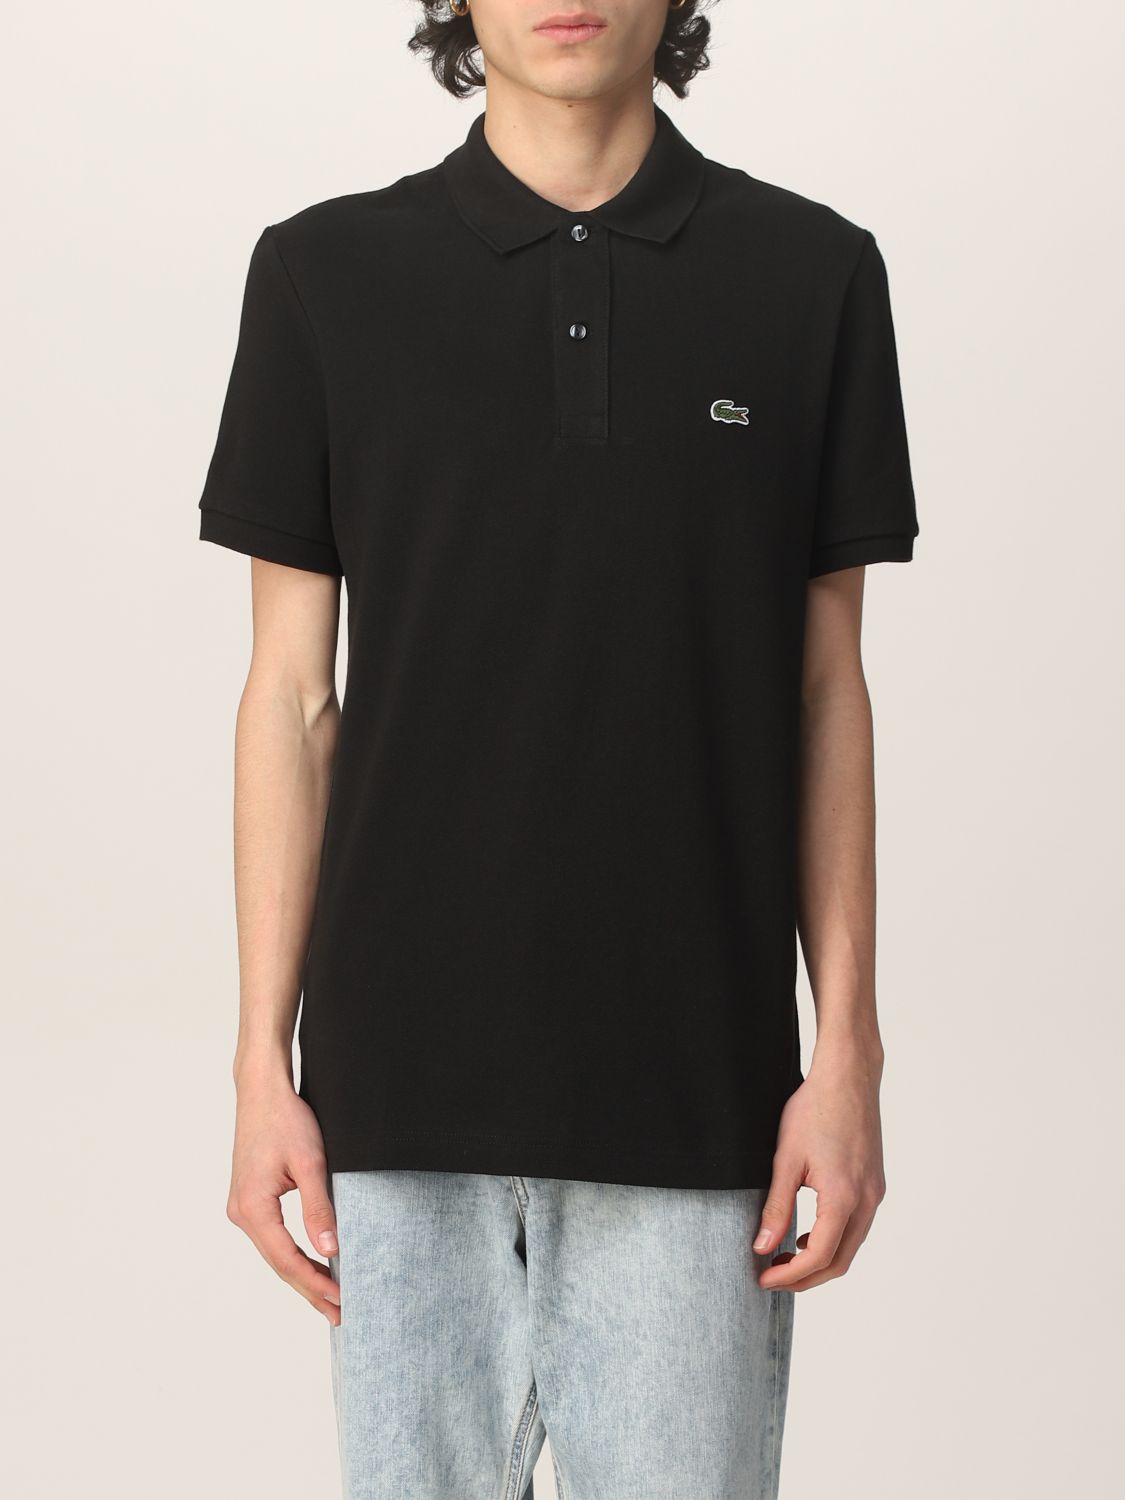 Lacoste Outlet: basic polo shirt with logo - Black | Lacoste polo shirt ...